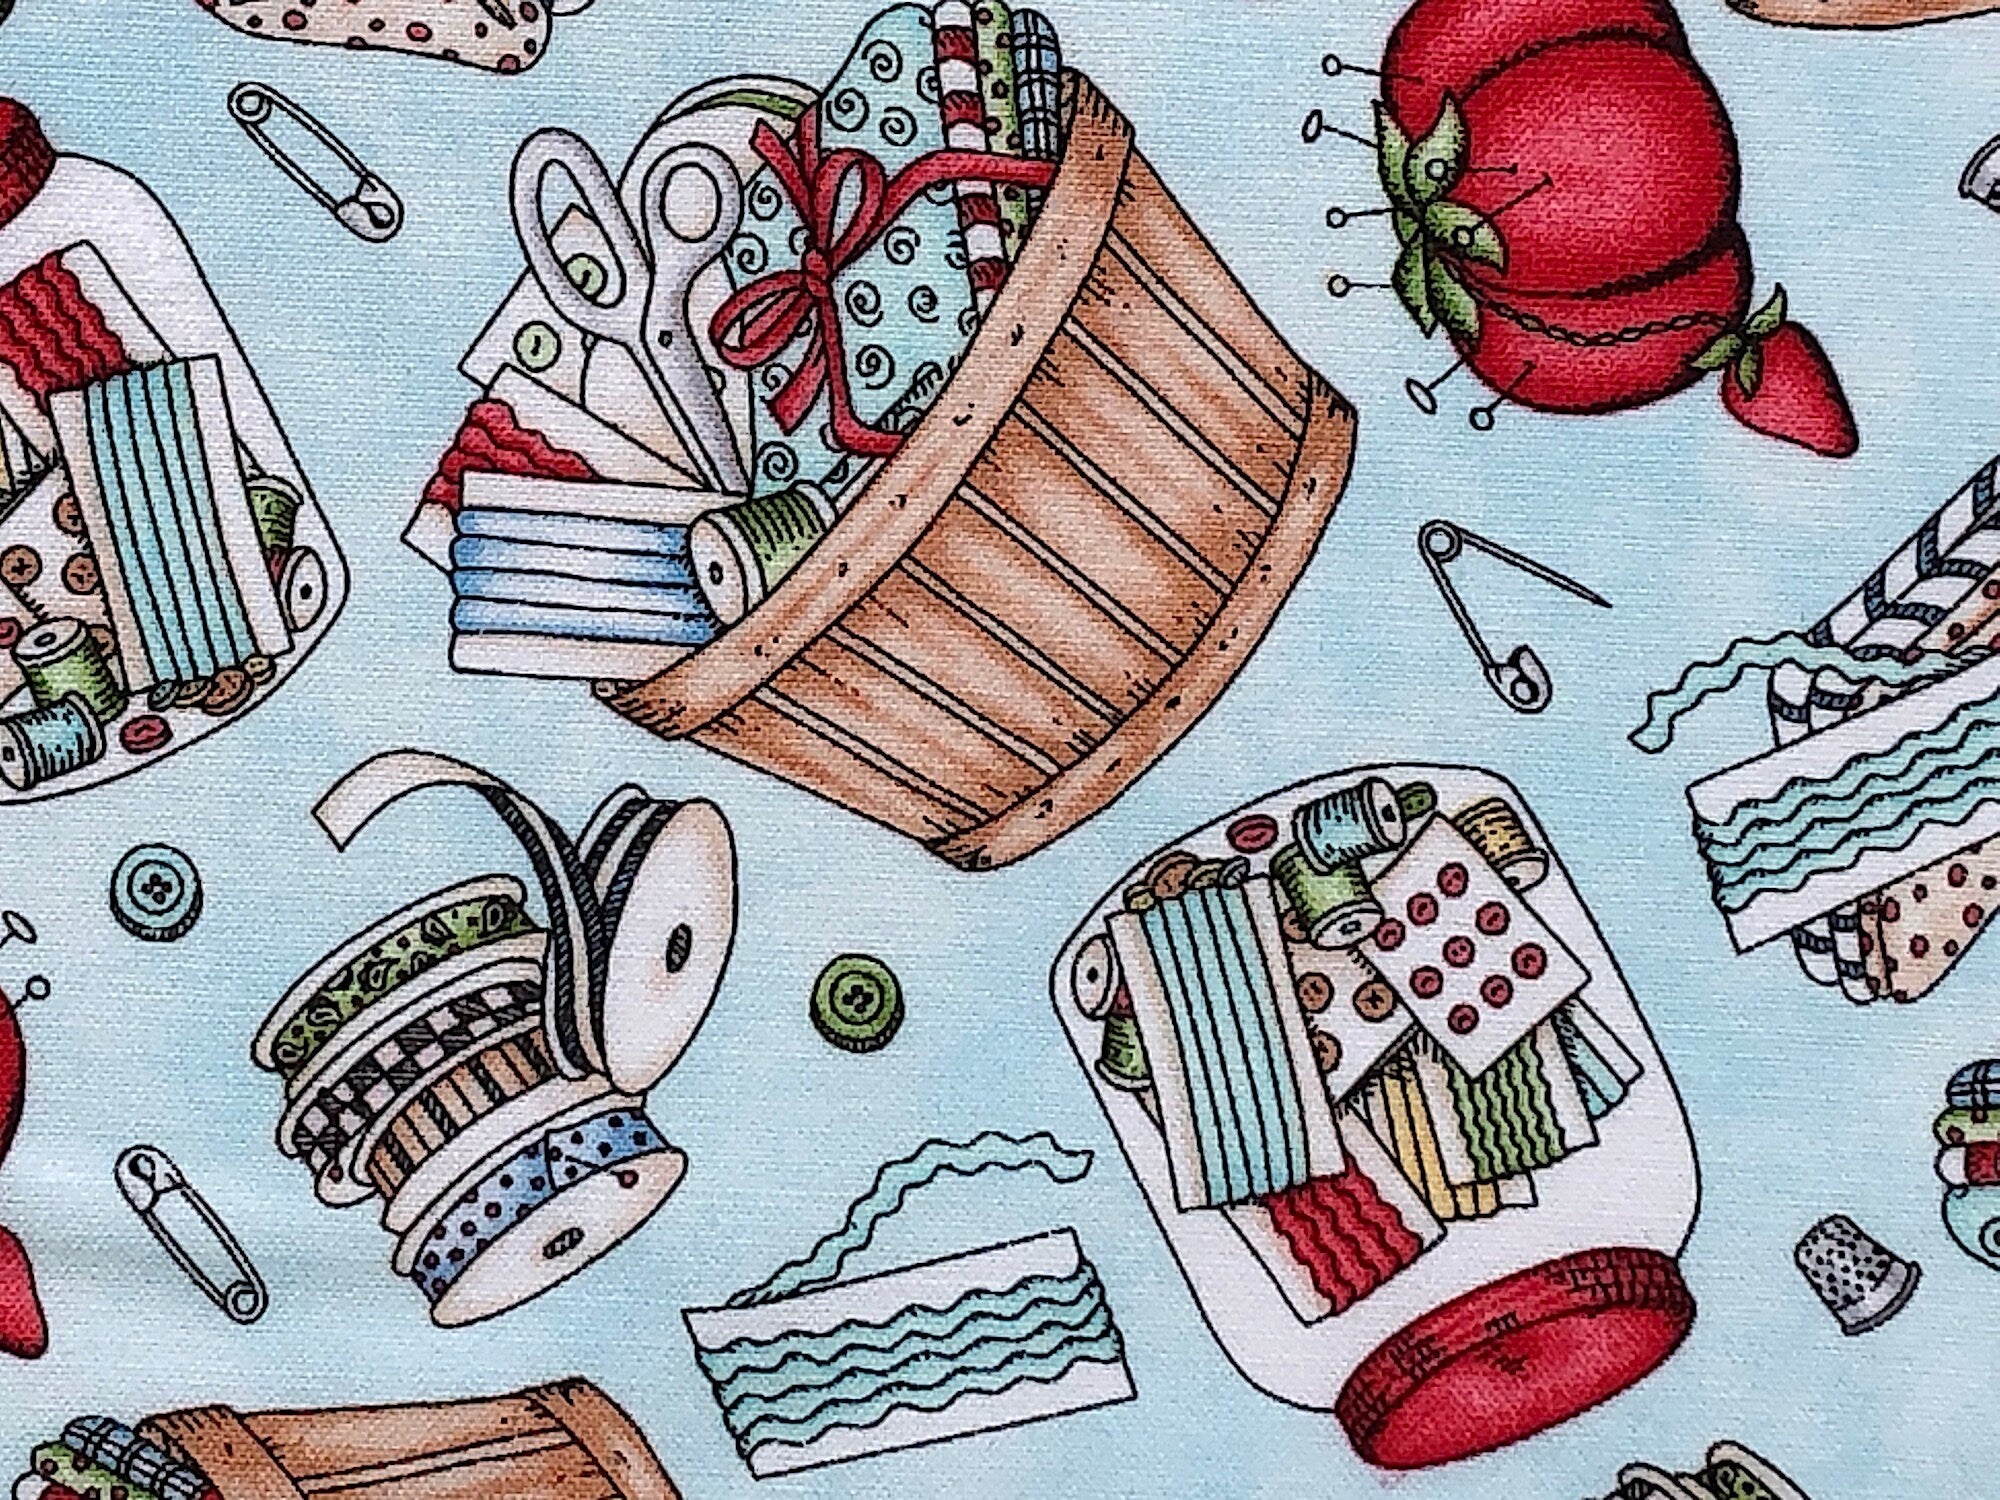 This fabric is covered with sewing notions such as buttons, thread, scissors, pincushions, fabric and more. There are also baskets and jars filled with sewing notions. 